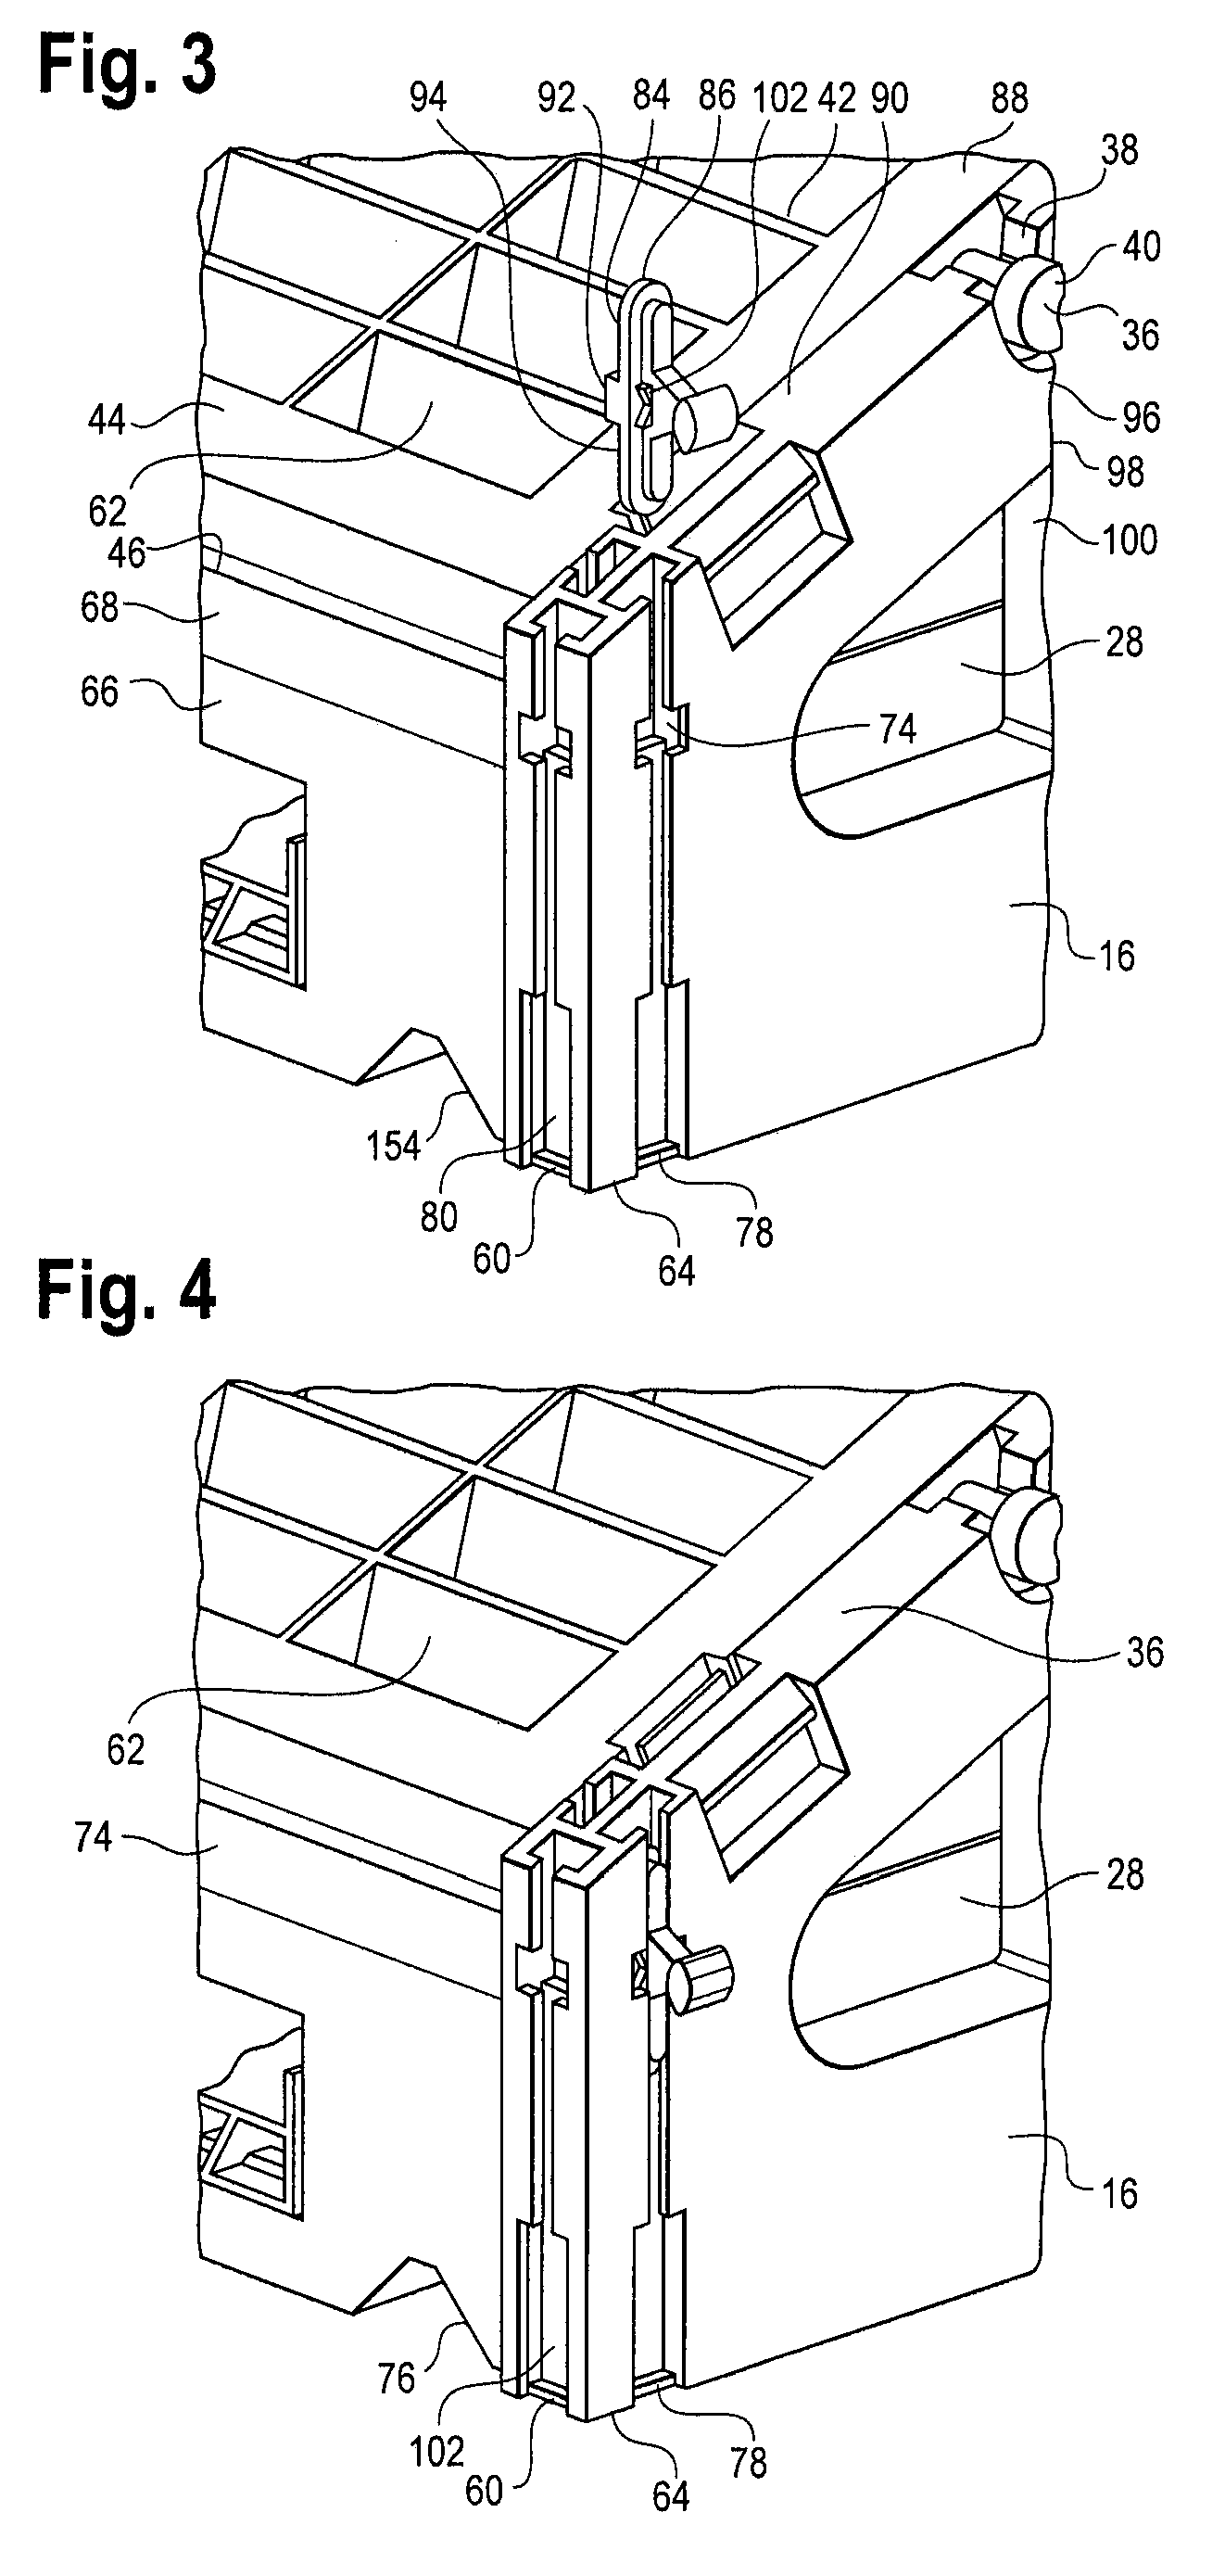 Solar panel support module and method of creating array of interchangeable and substitutable solar panel support modules